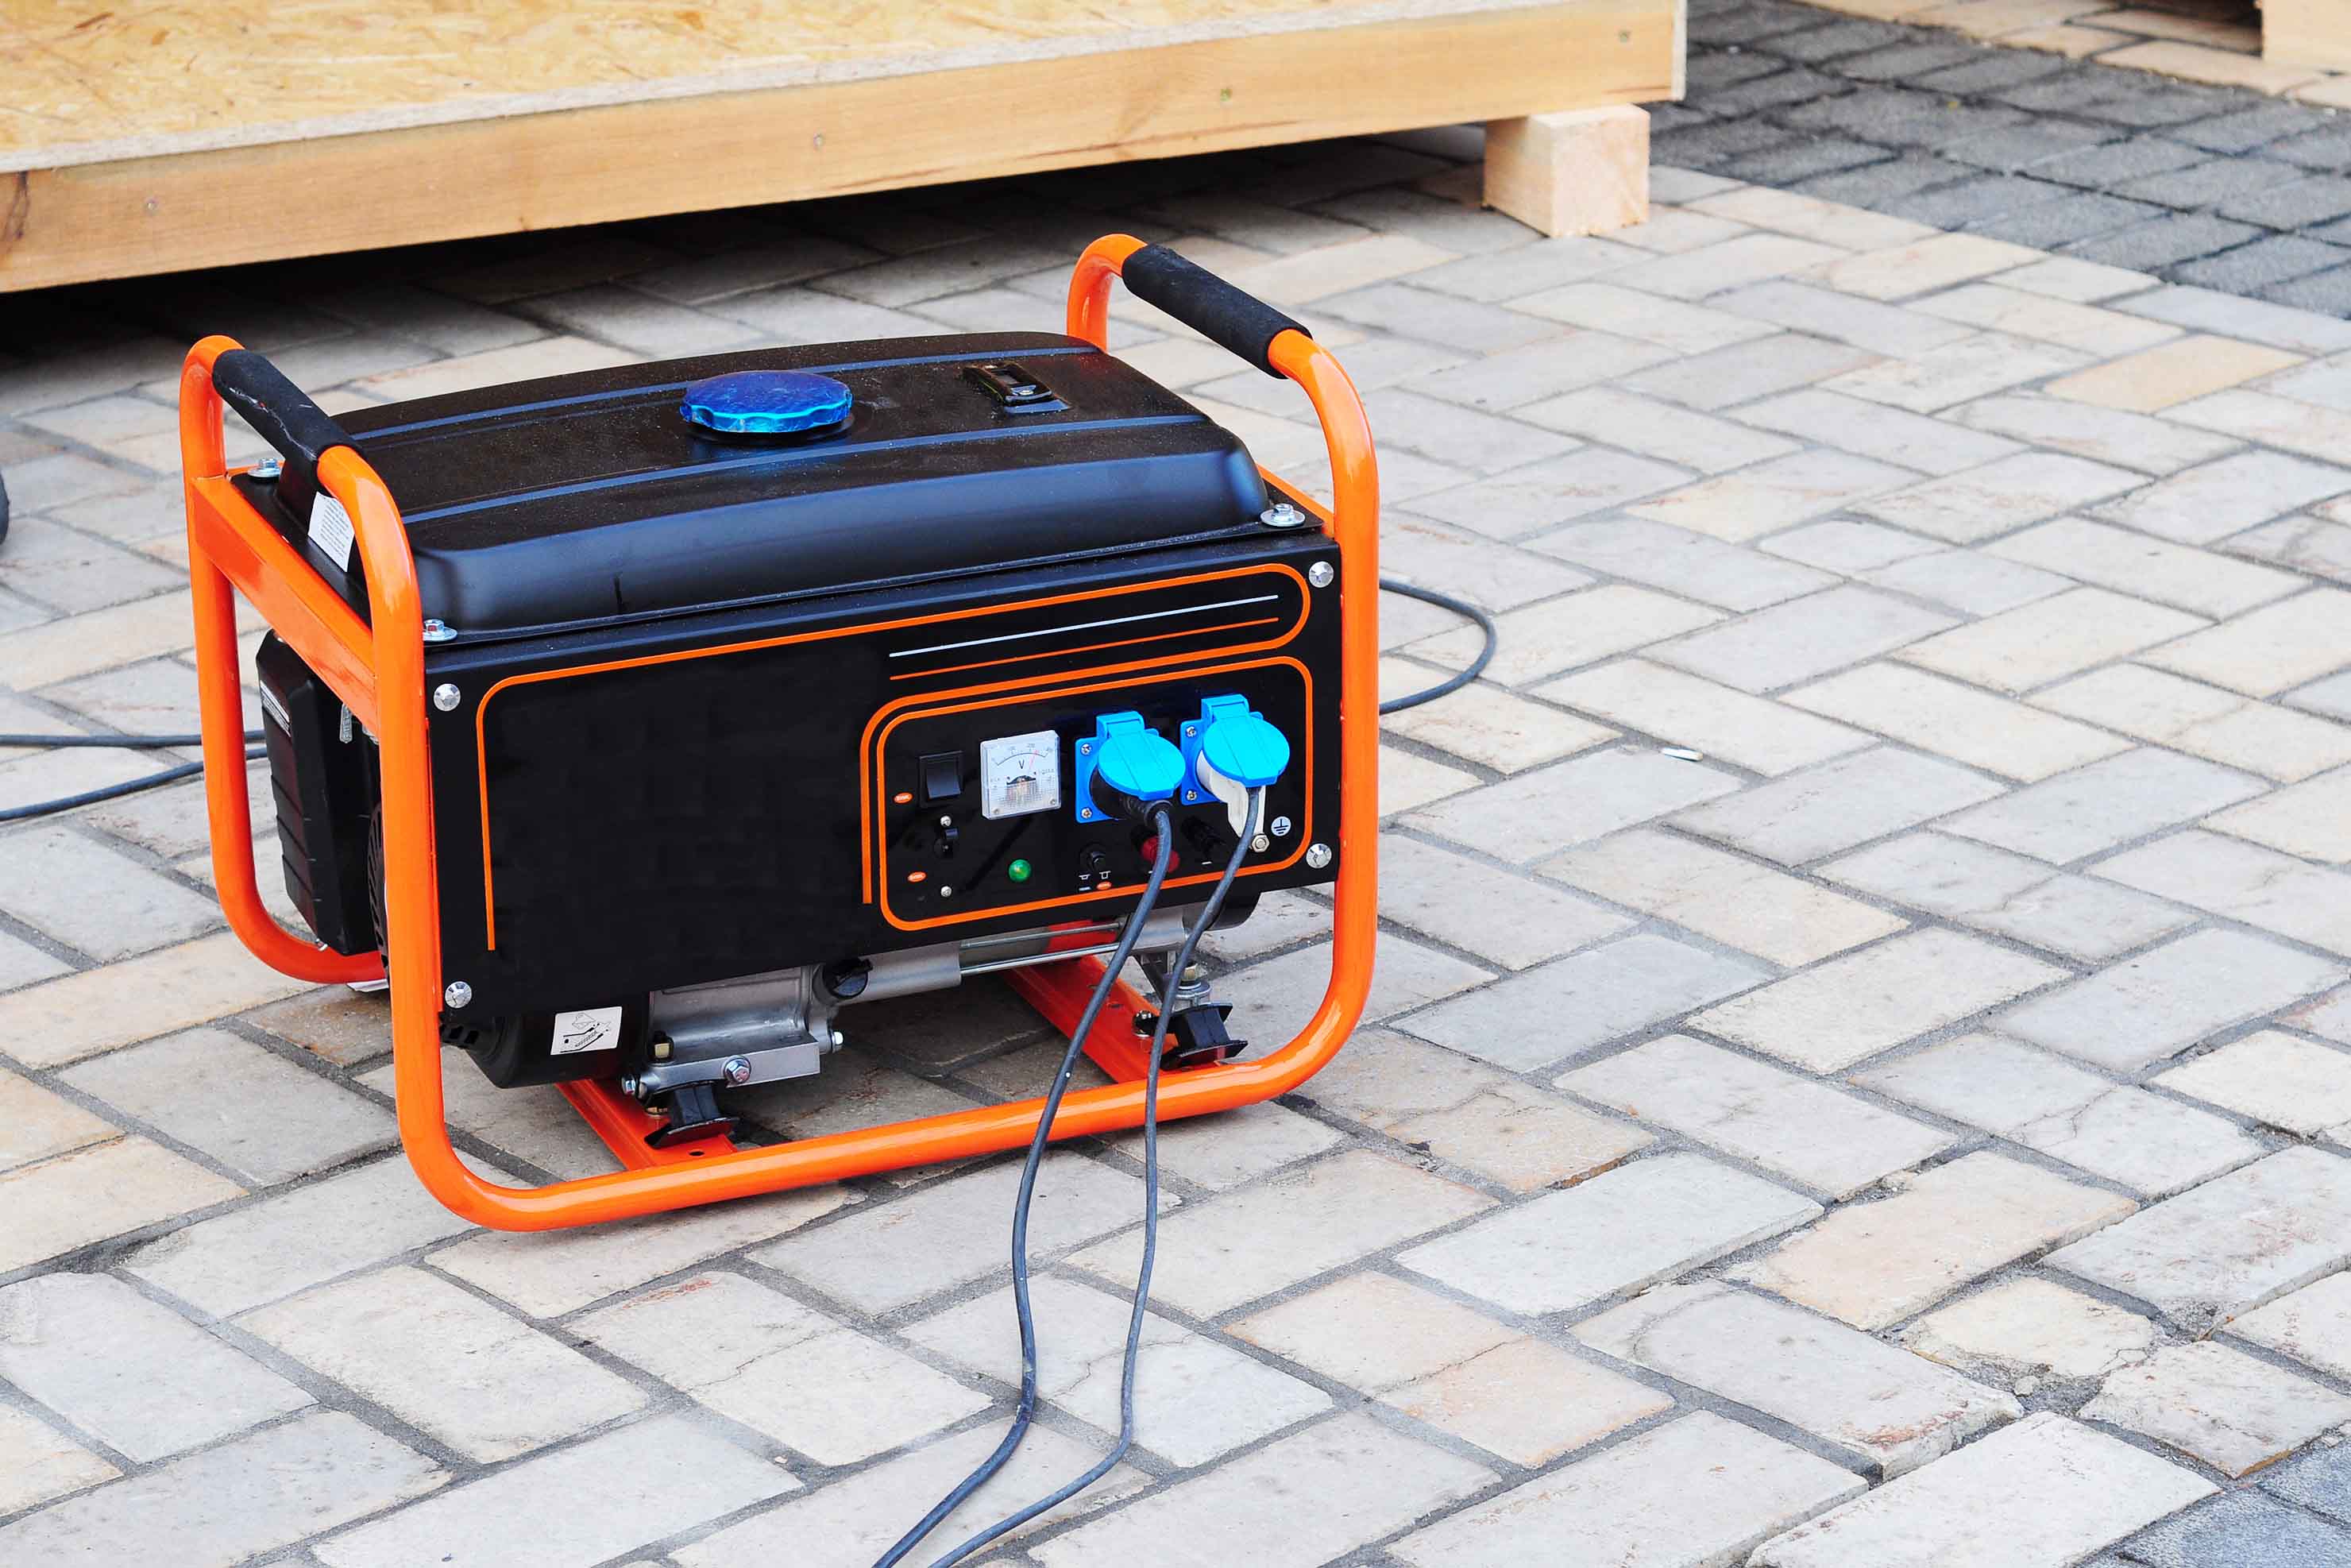 Features To Consider When Selecting A Generator